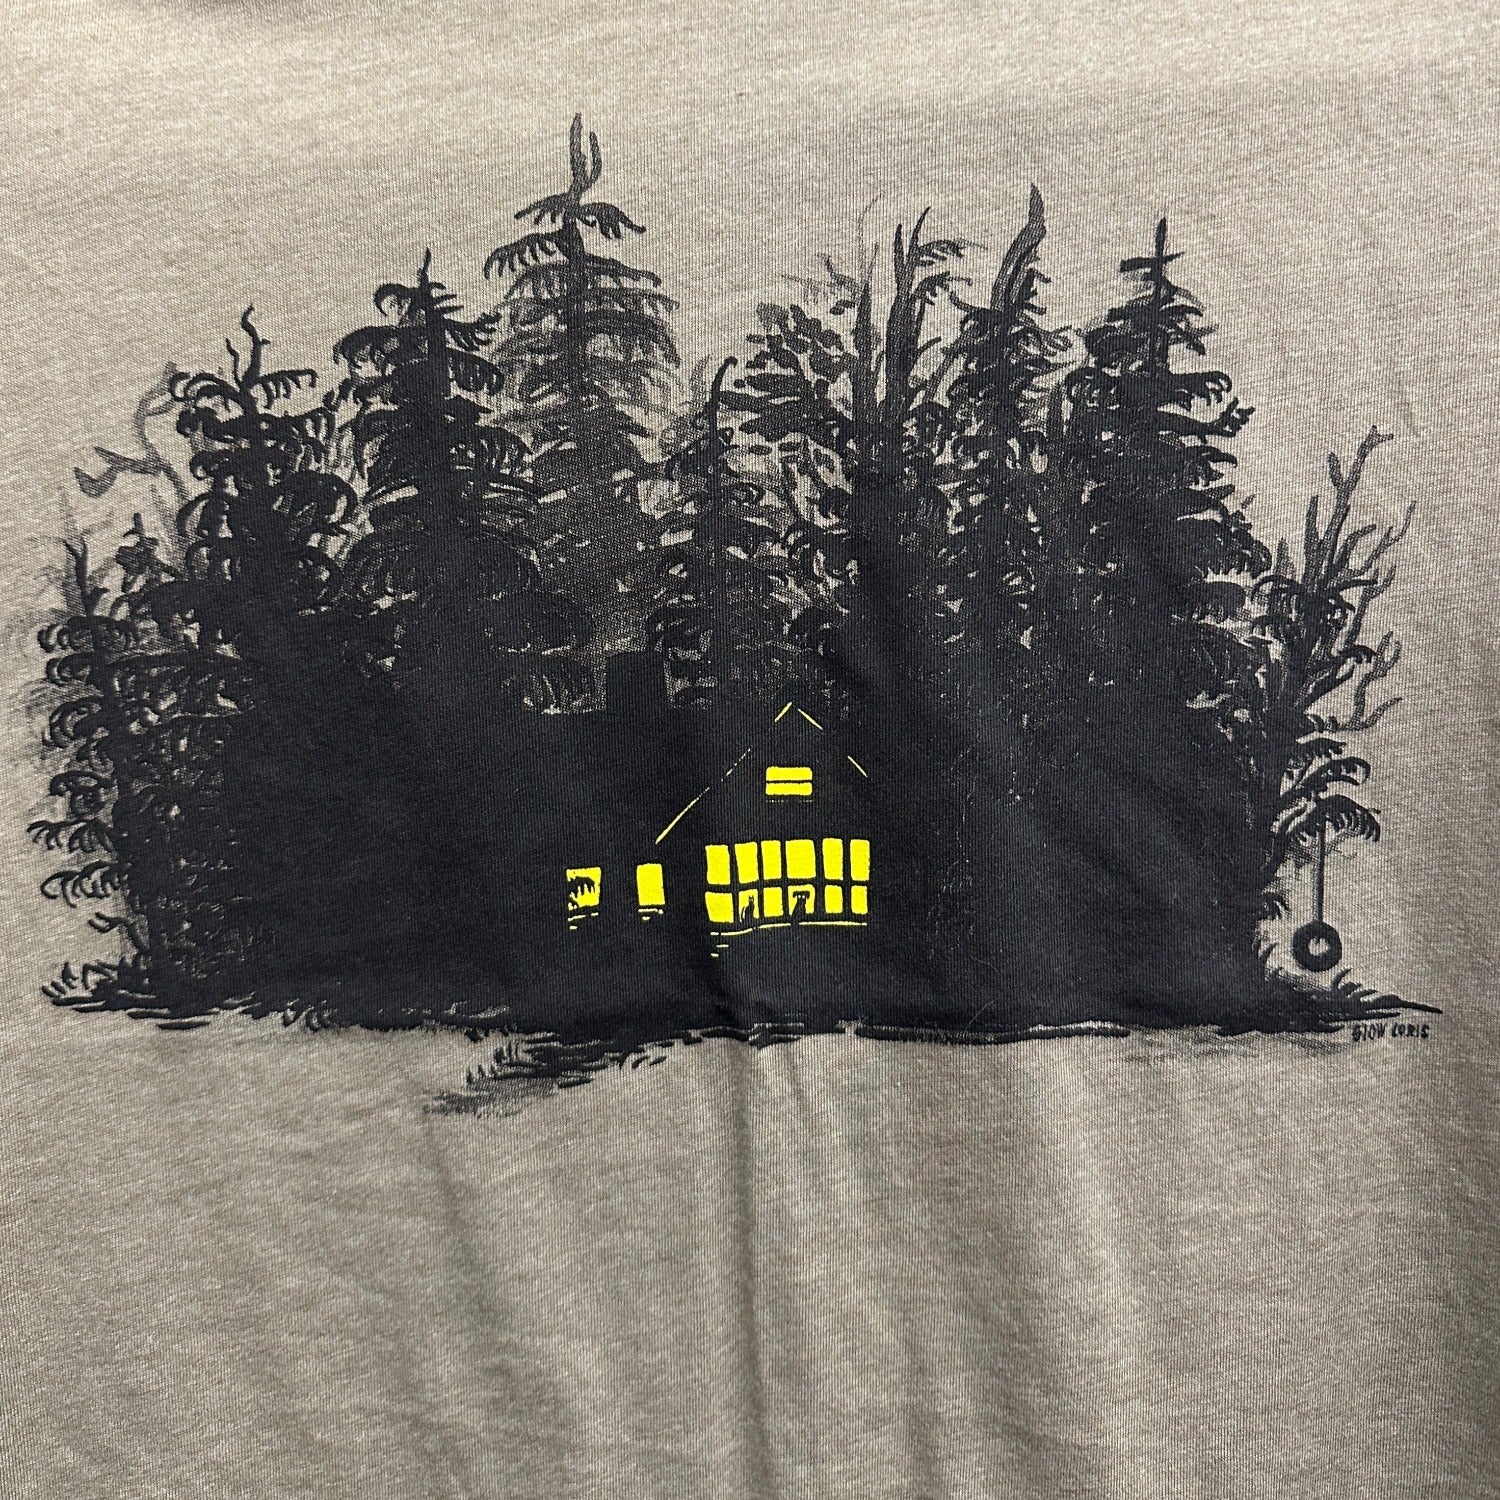 close up showing print of brown t-shirt with print of black ink of silhouetted trees with yellow ink house lights shining out of darkness. Two animals sitting in the window.